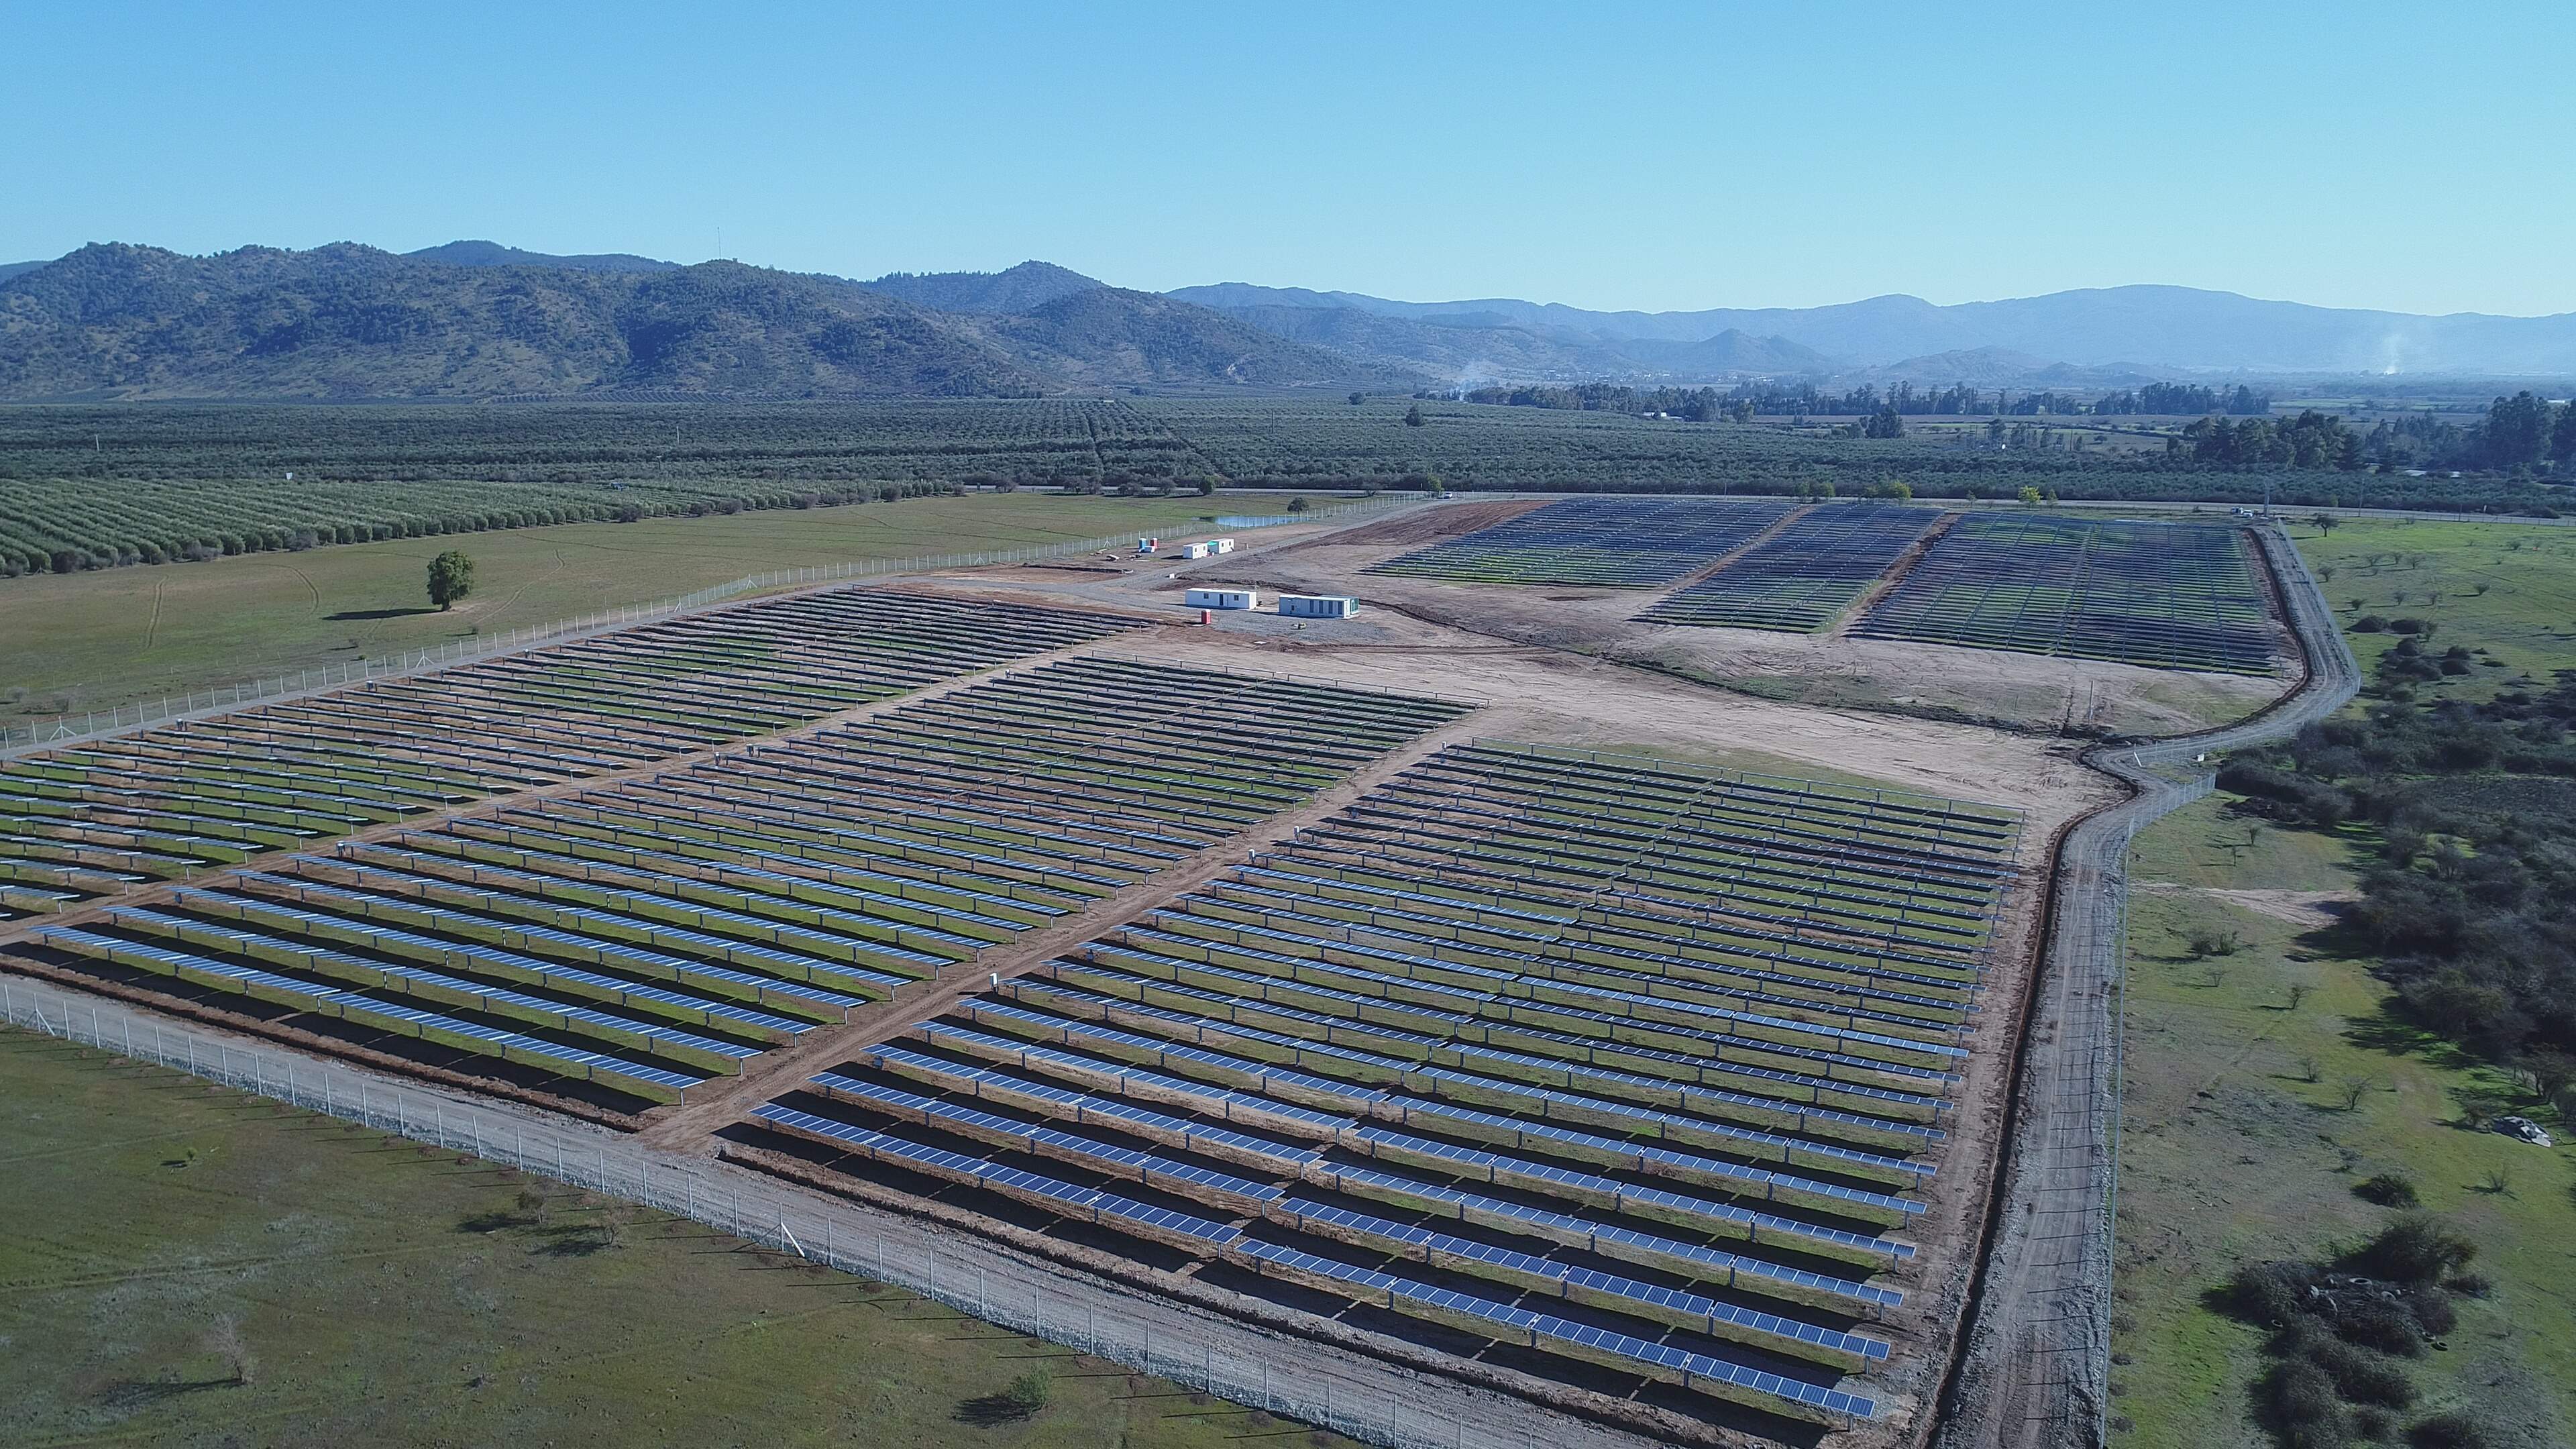 Building Energy commissions solar PV plant in Chile